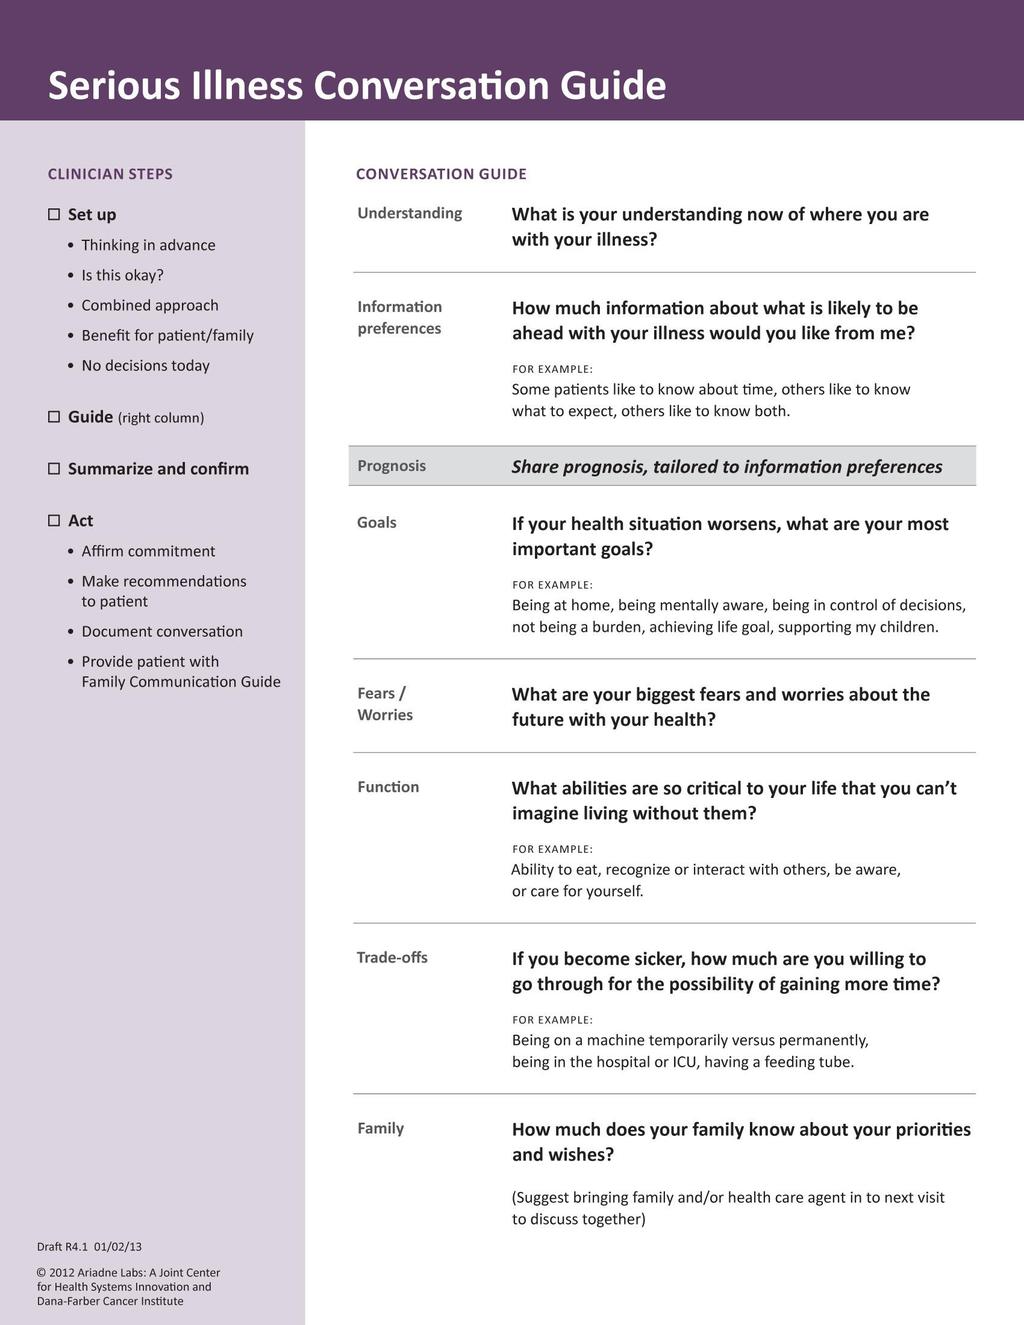 Communication & Checklists Checklist Theory Used in